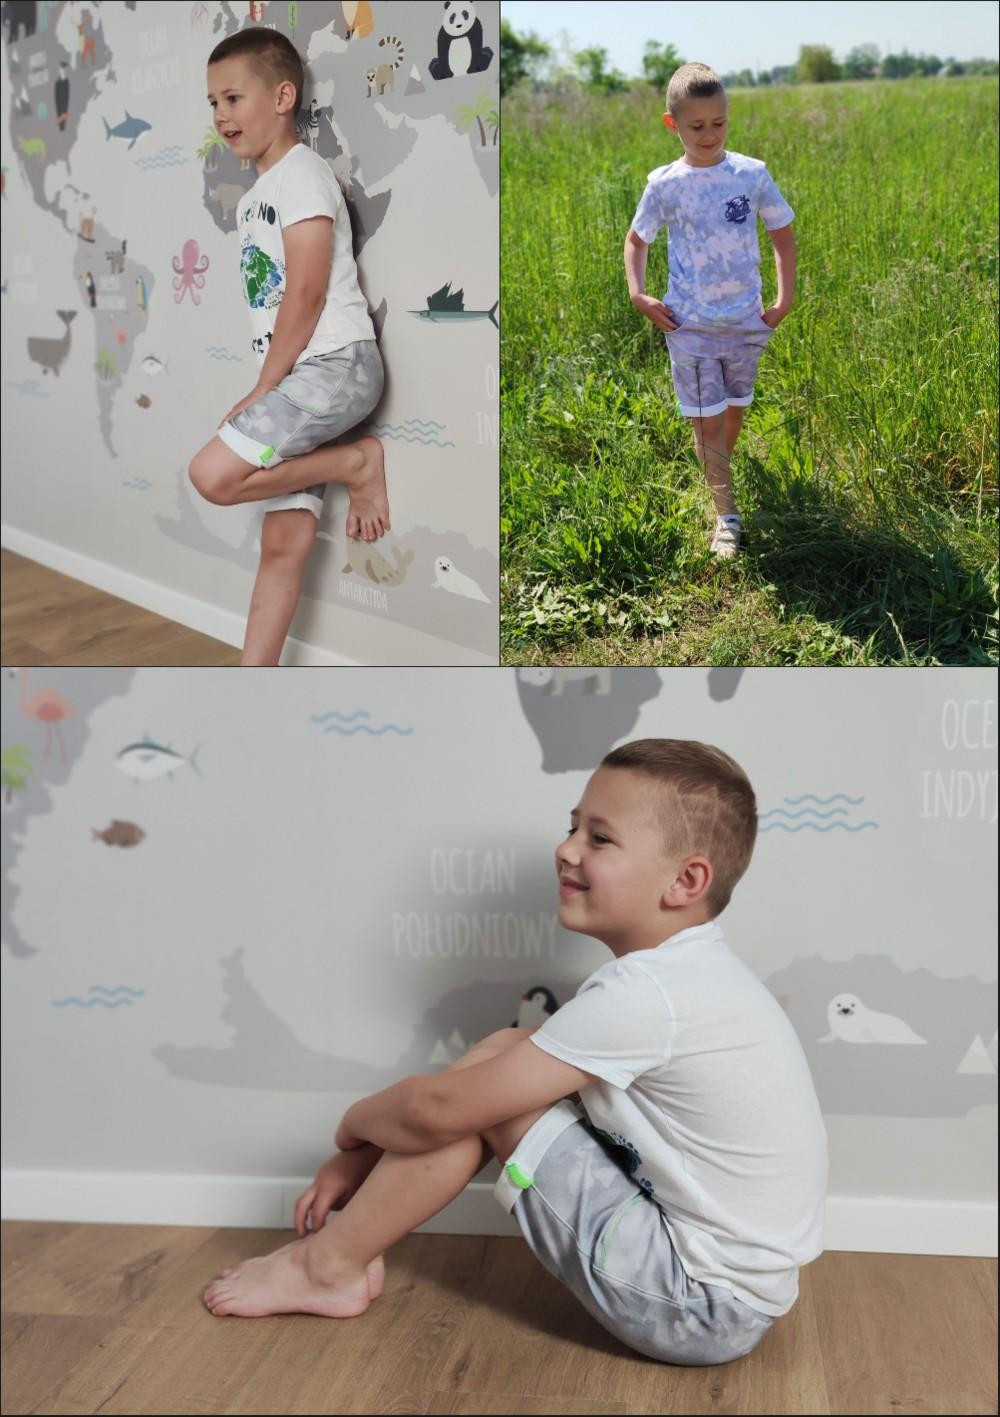 KID`S SHORTS (RIO) - MINI LEAVES AND INSECTS PAT. 6 (TROPICAL NATURE) / white - looped knit fabric 